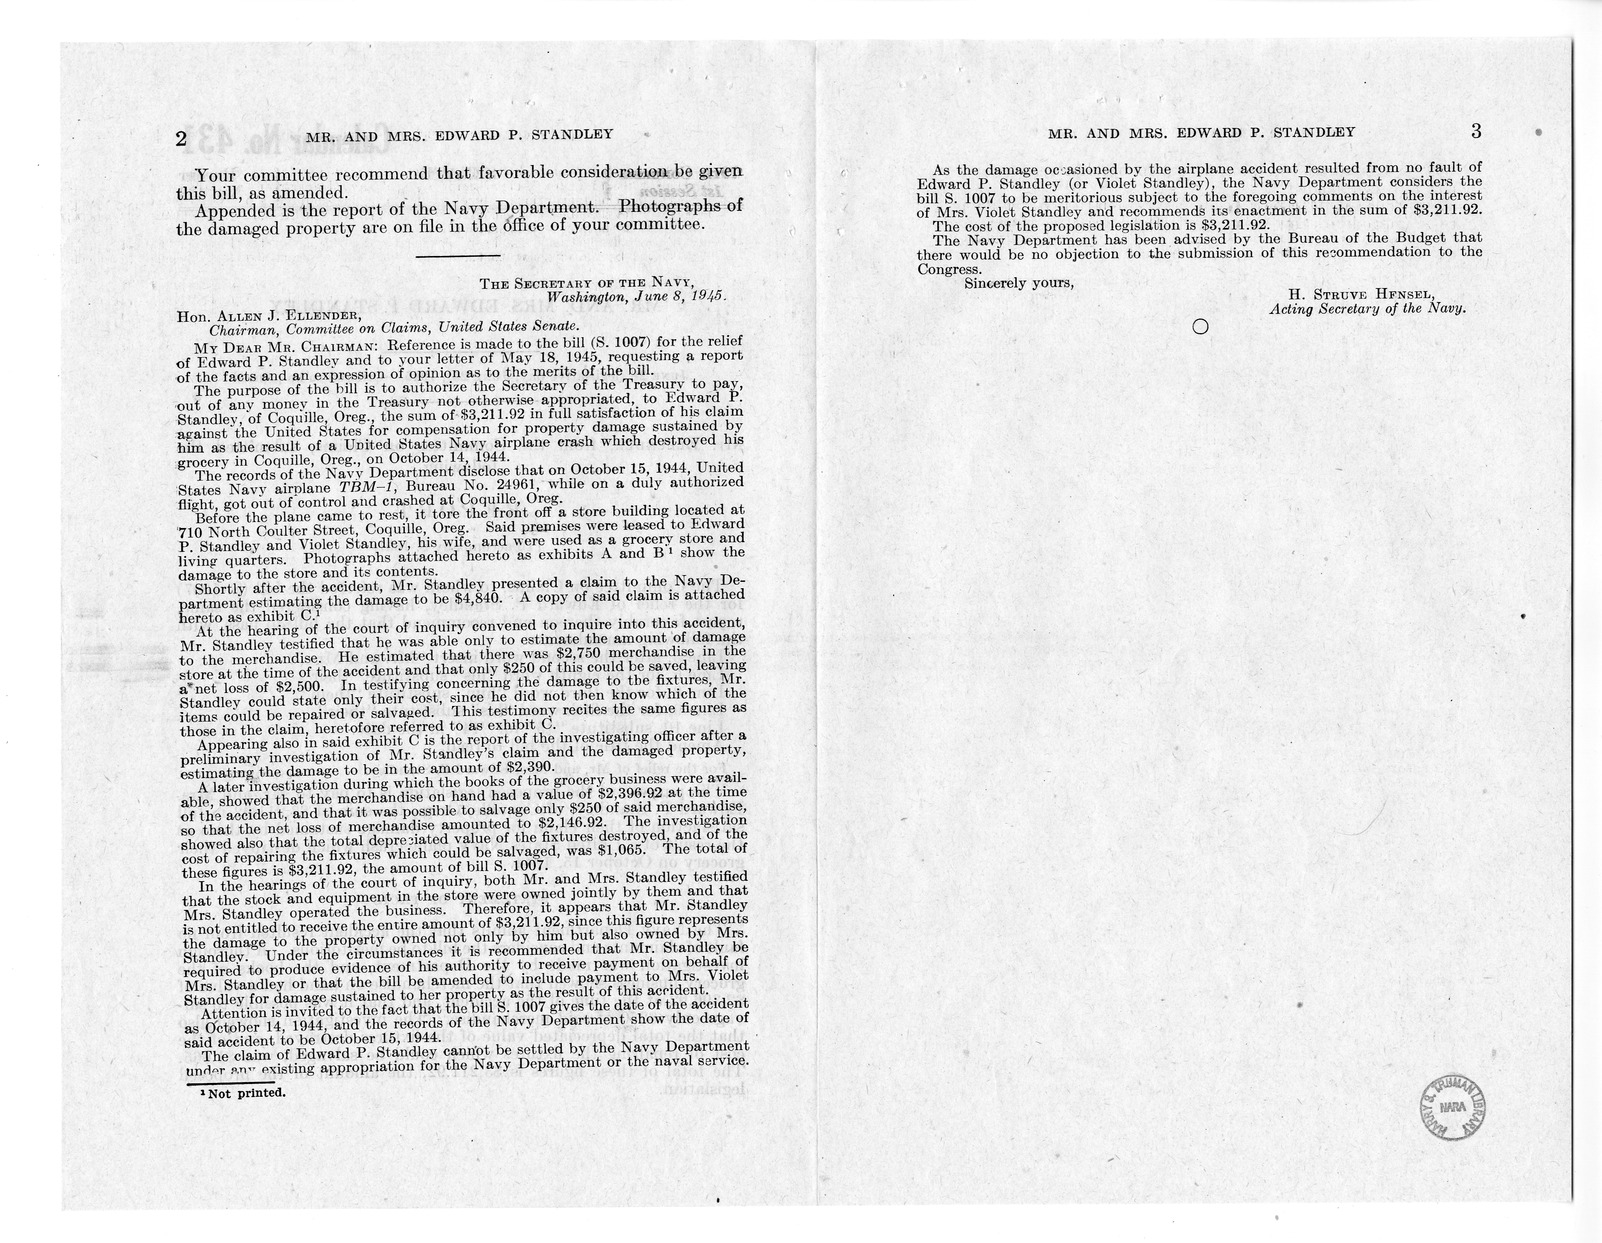 Memorandum from Frederick J. Bailey to M. C. Latta, S. 1007, For the Relief of Mr. and Mrs. Edward P. Standley, with Attachments